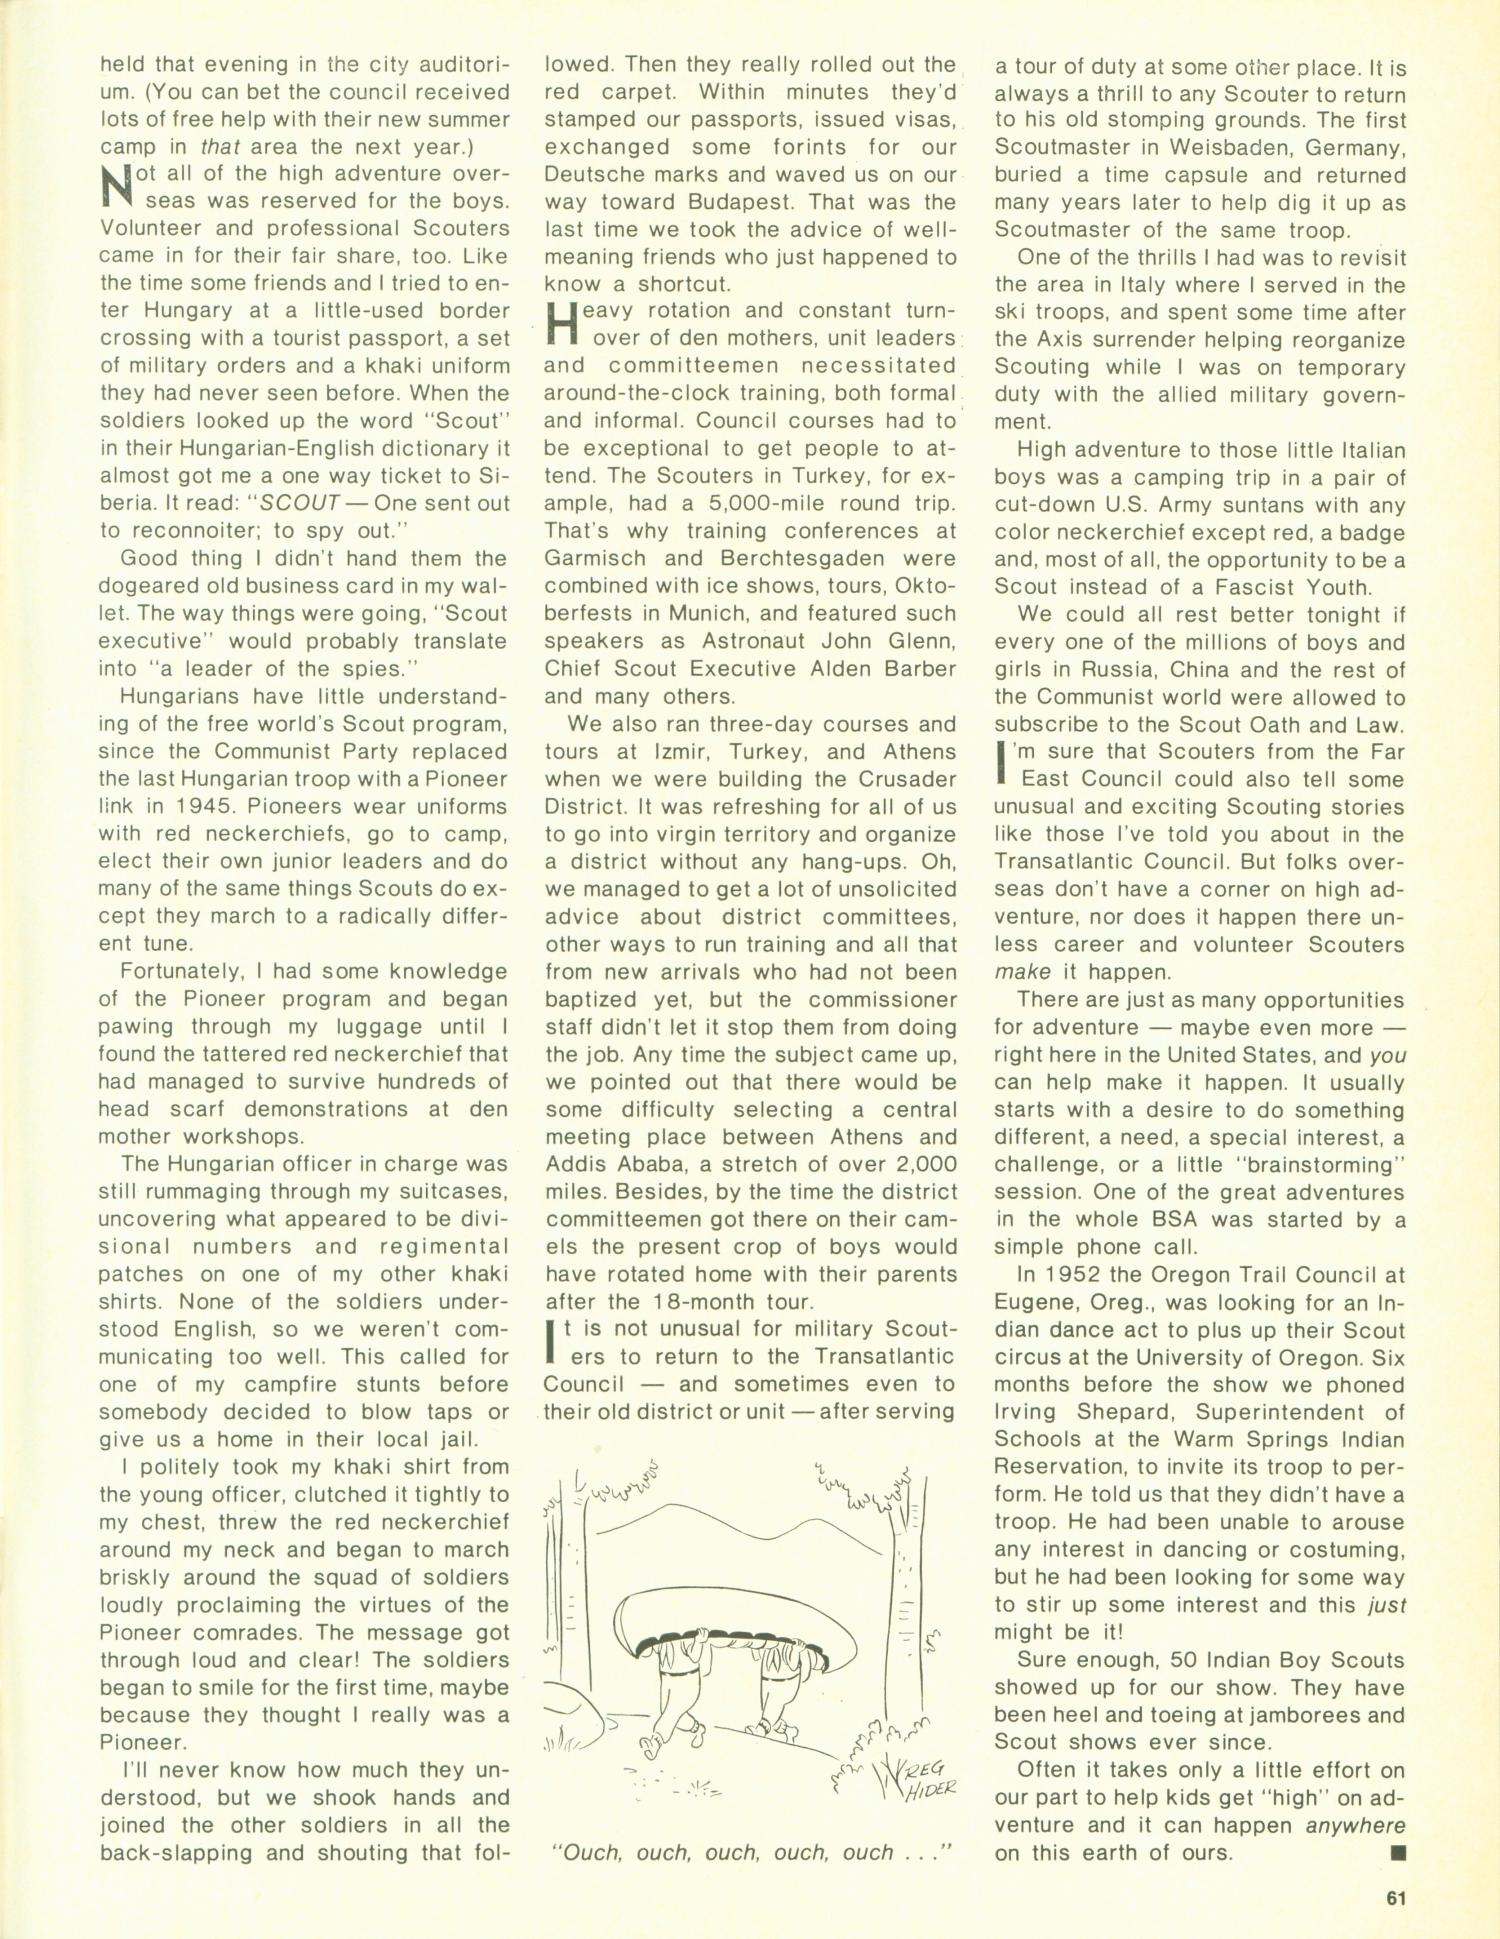 Scouting, Volume 63, Number 1, January-February 1975
                                                
                                                    61
                                                